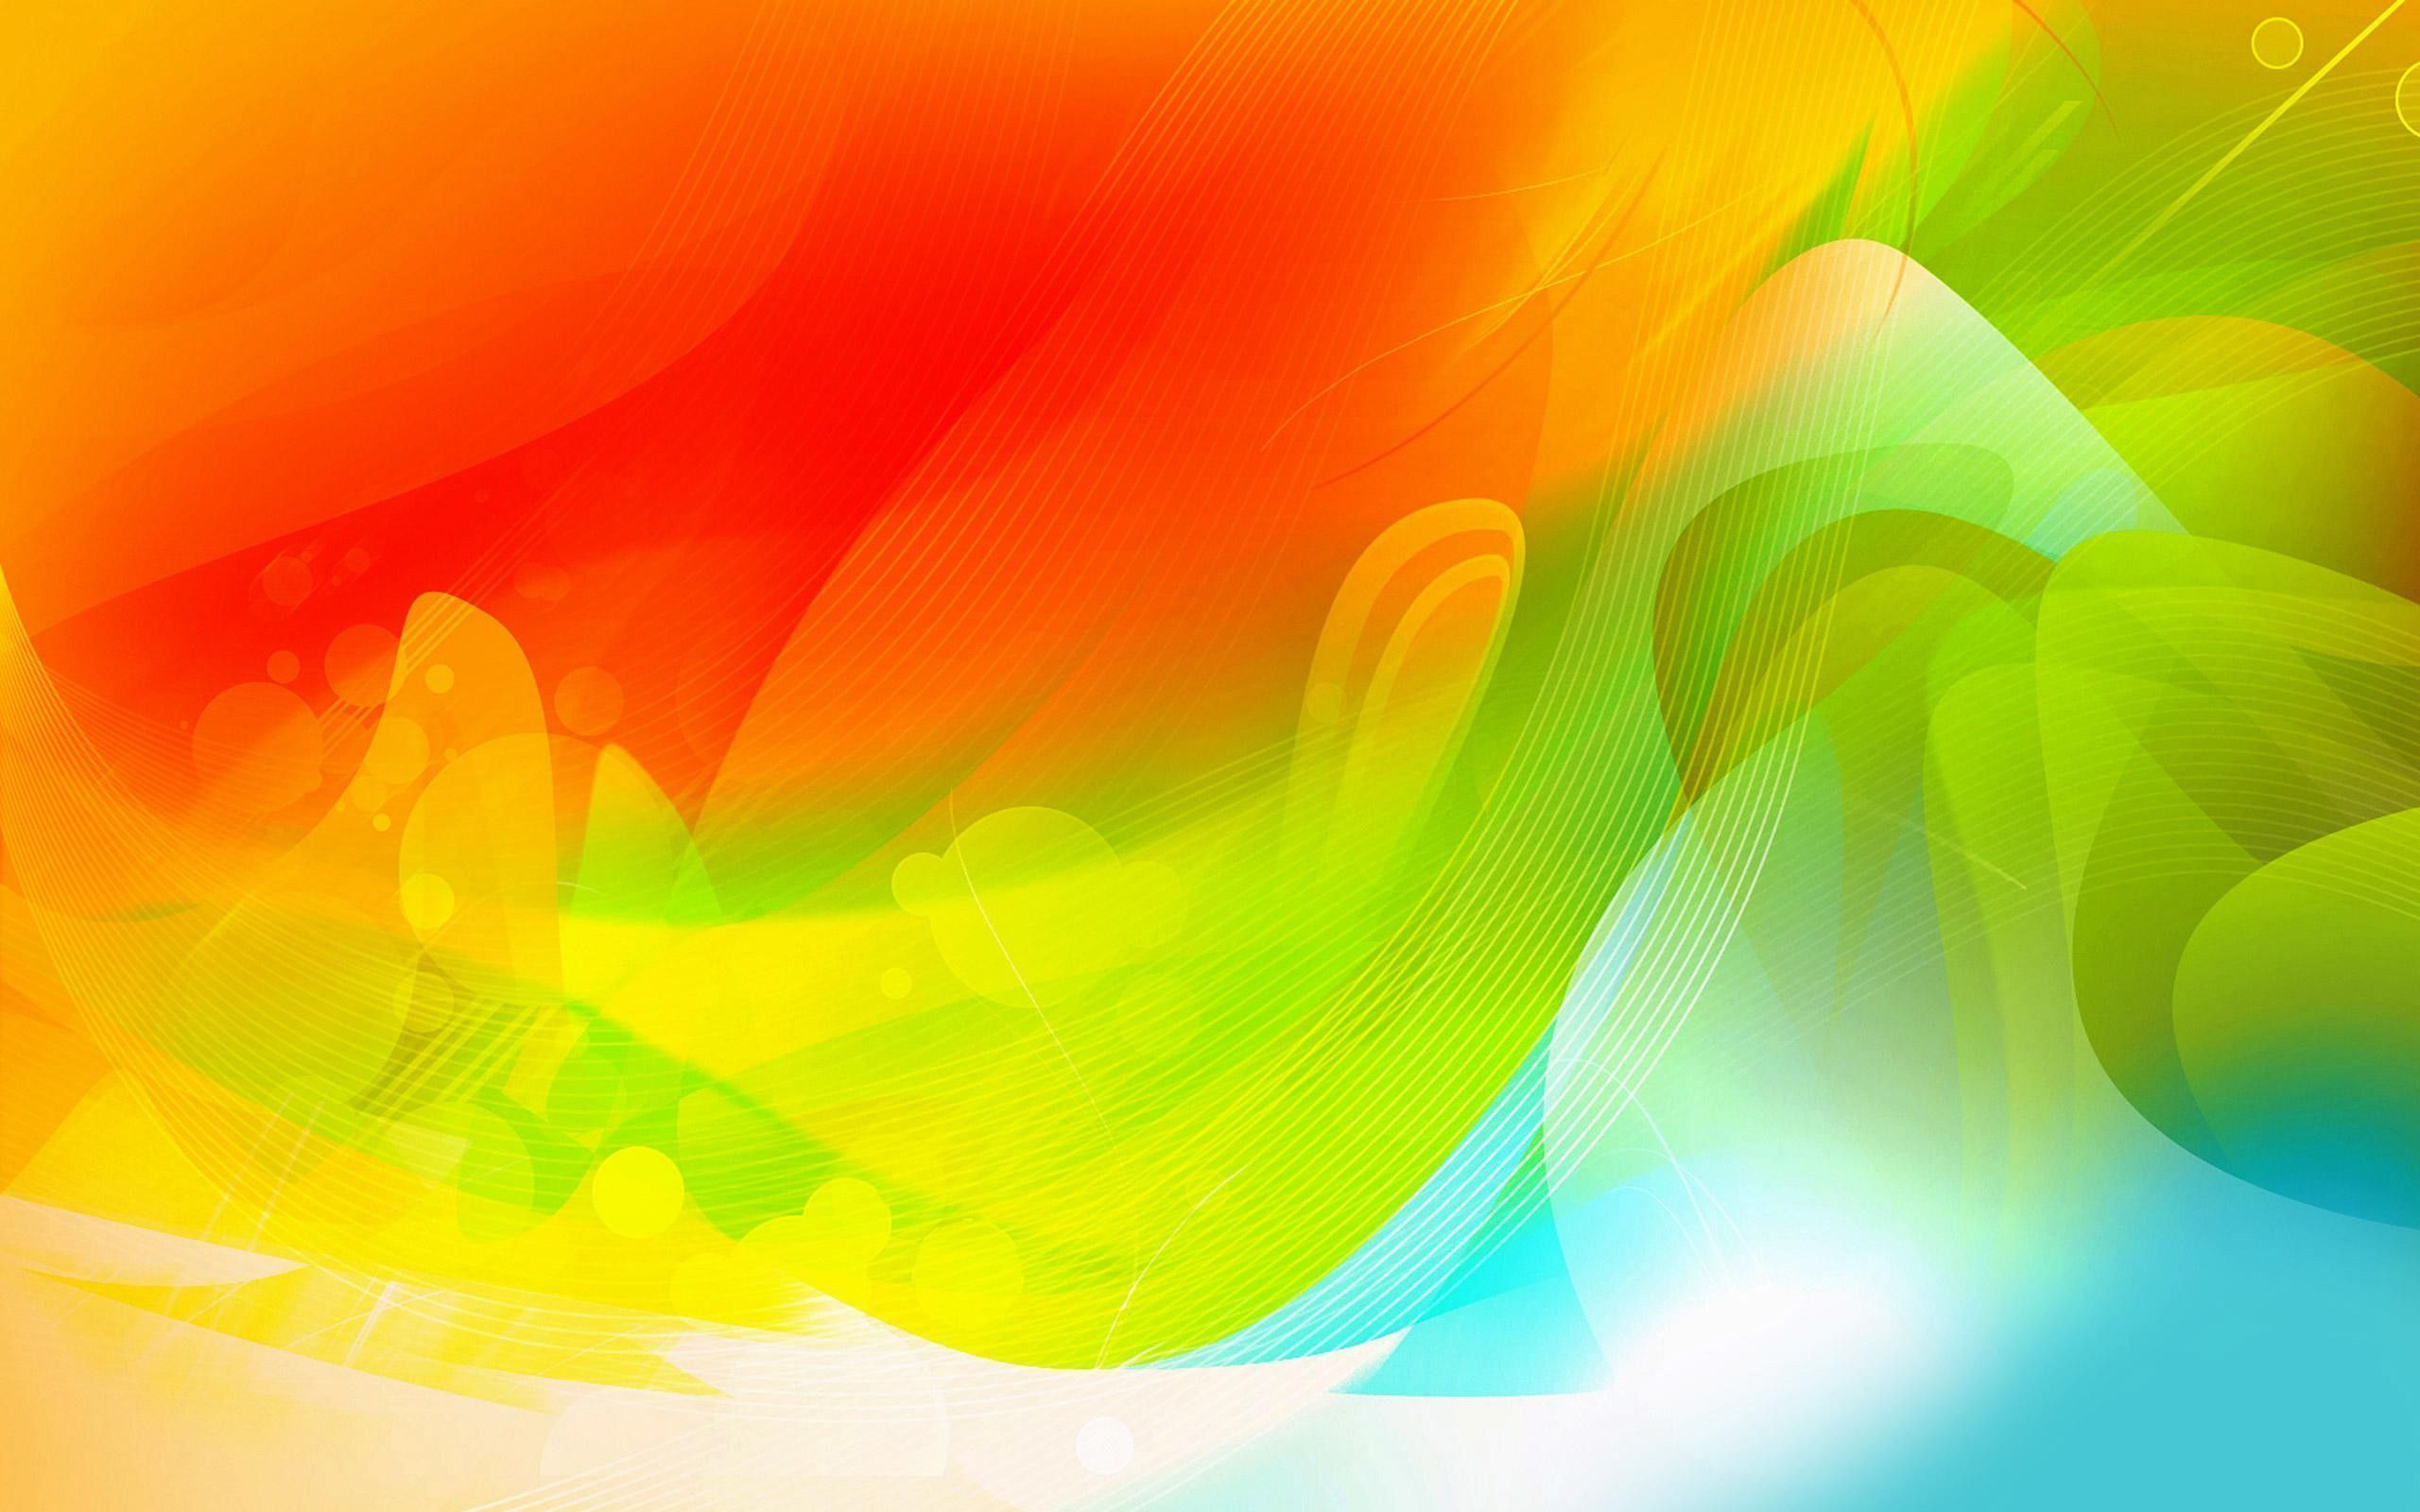 Colorful Background wallpaper | 1920x1200 | #65923